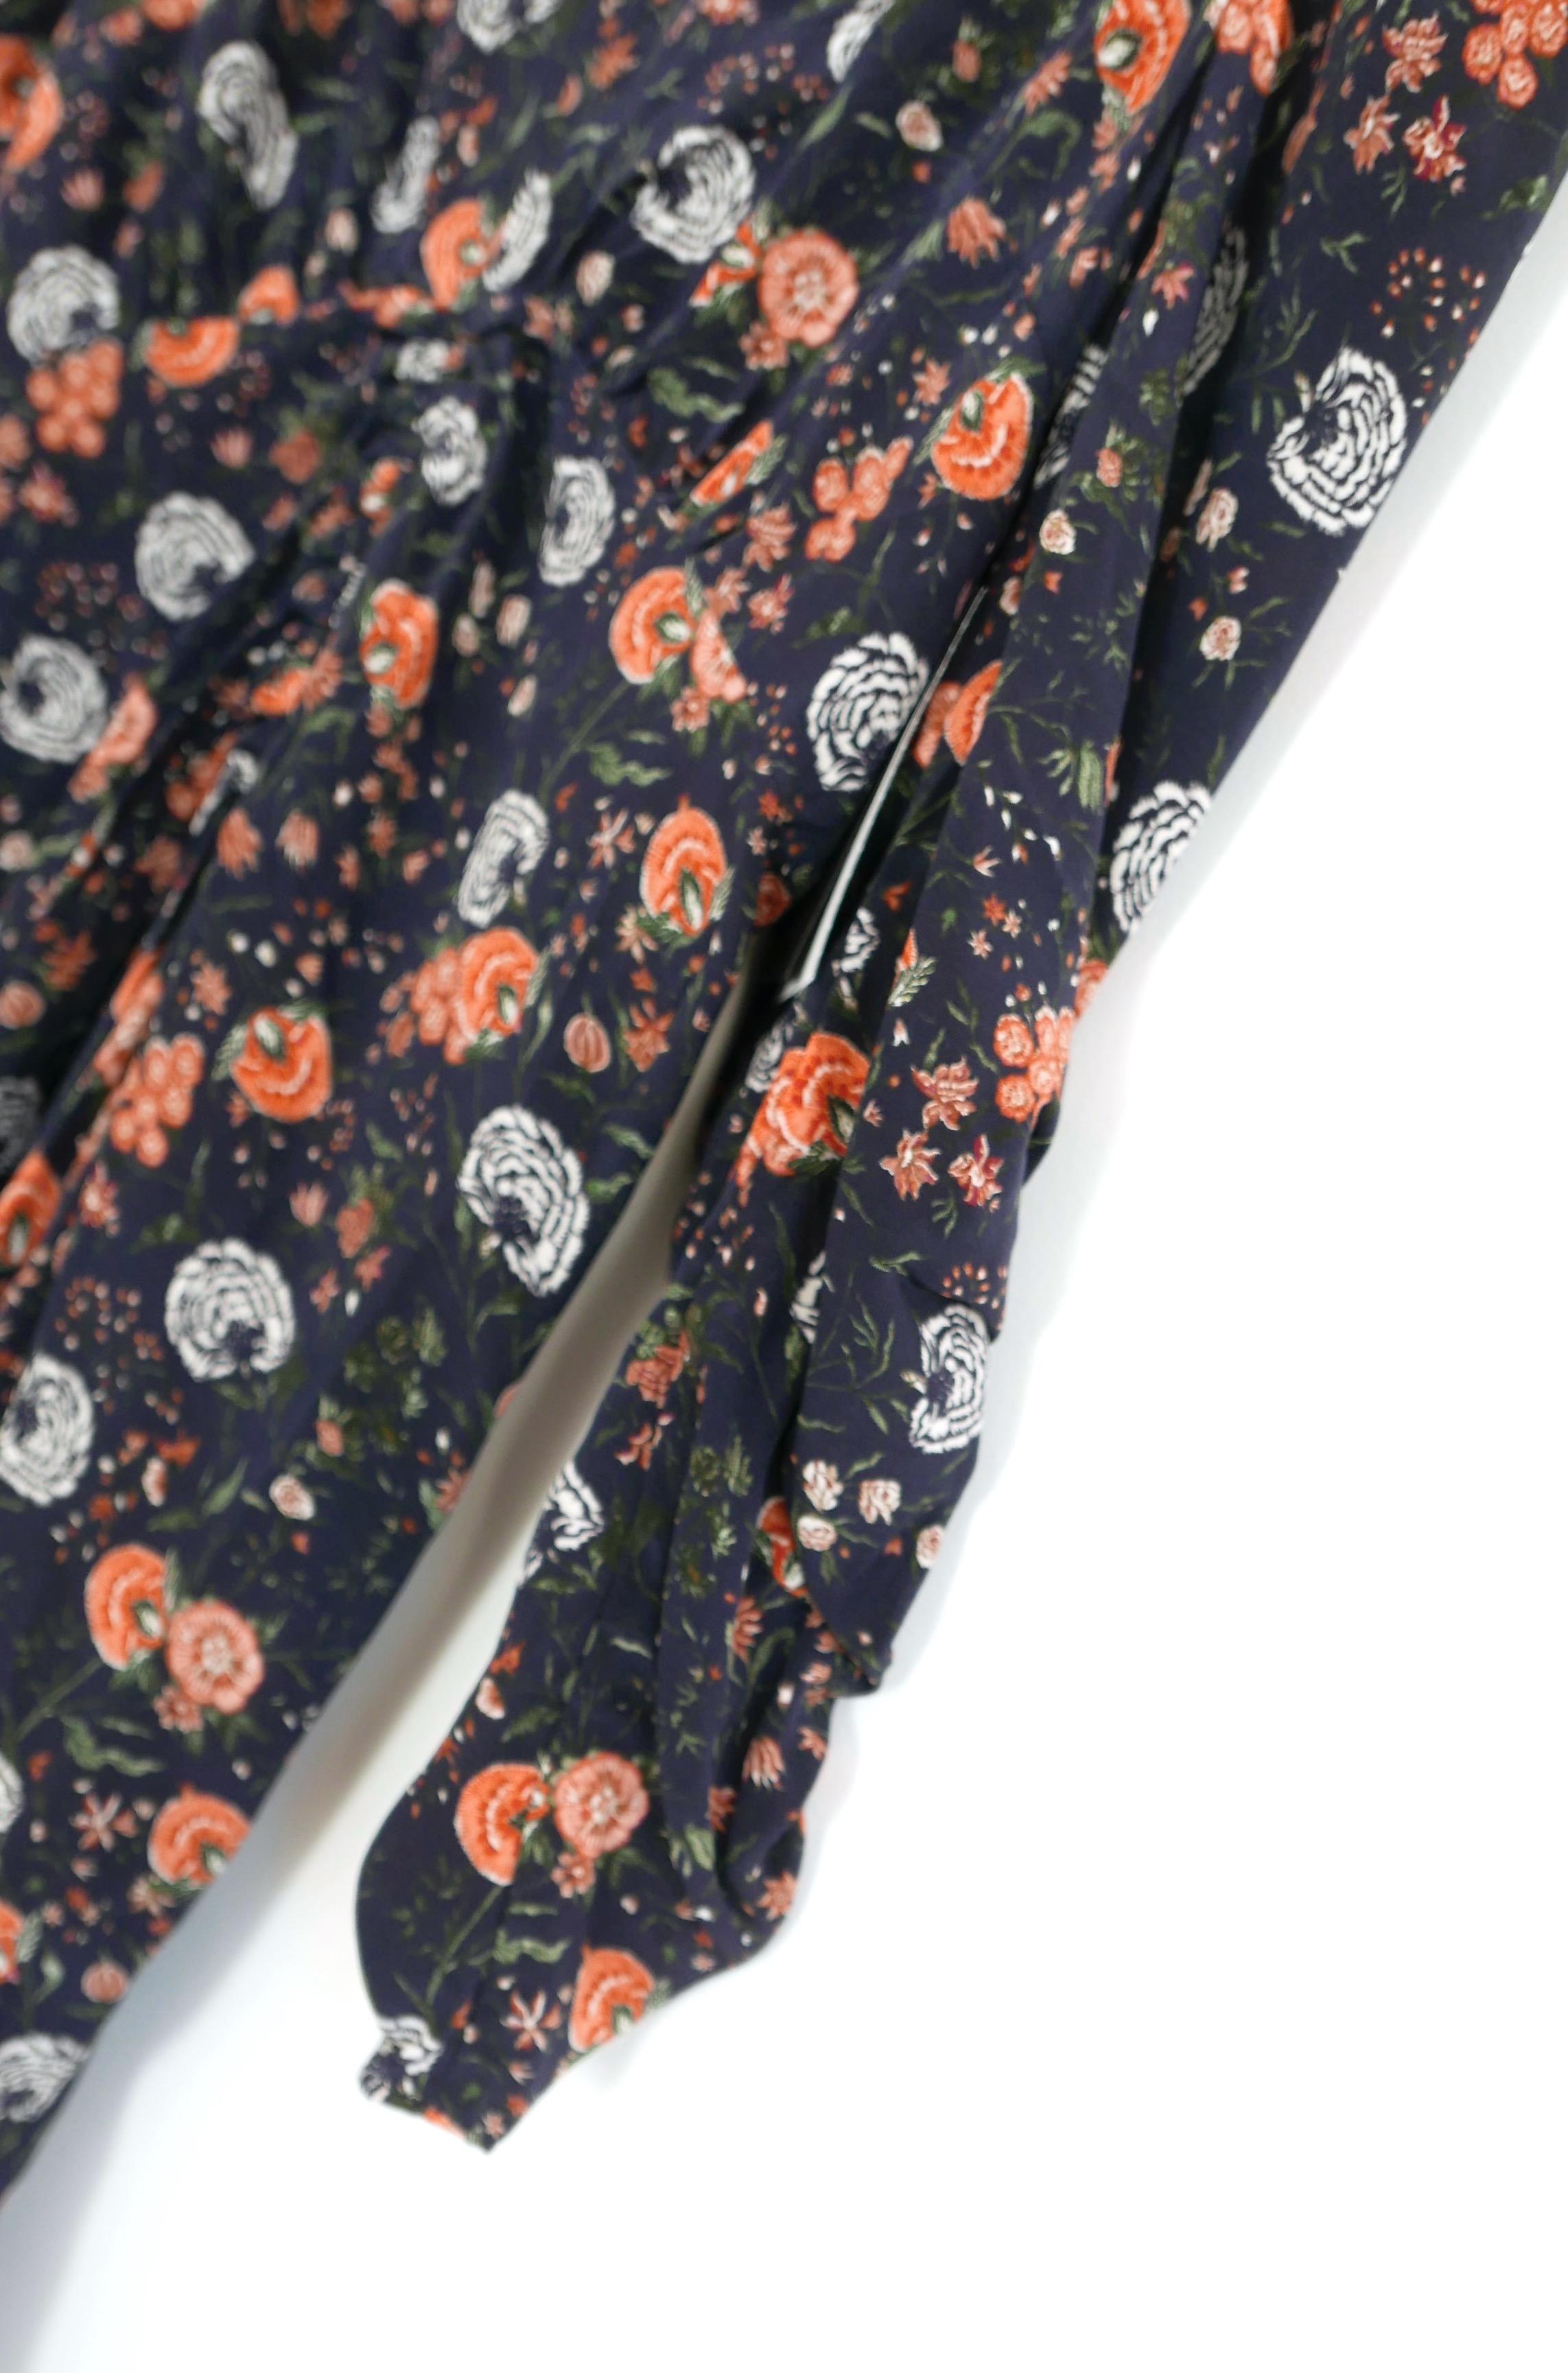  Isabel Marant Albini Floral Print Midnight Silk Dress In New Condition For Sale In London, GB